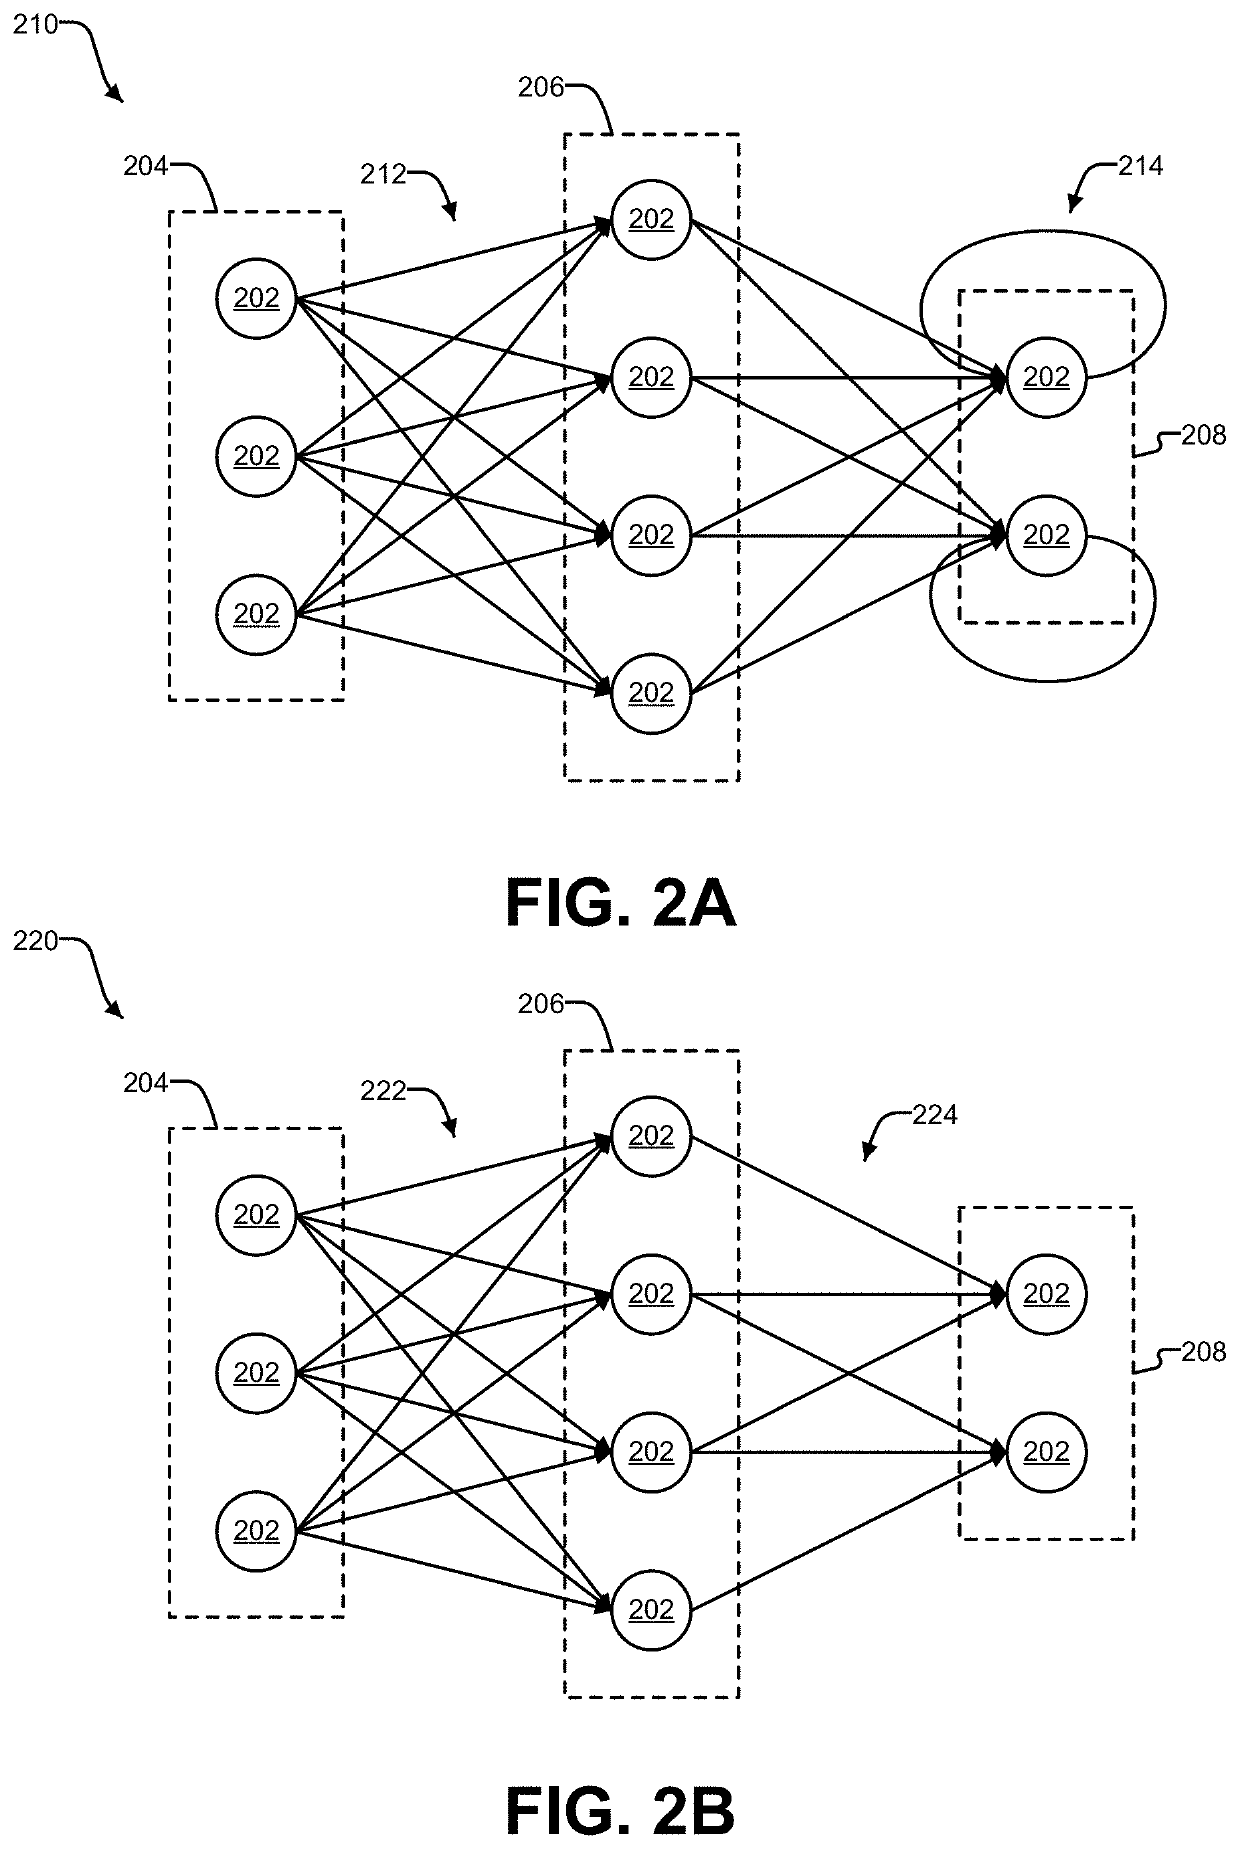 Bandwidth compression for neural network systems